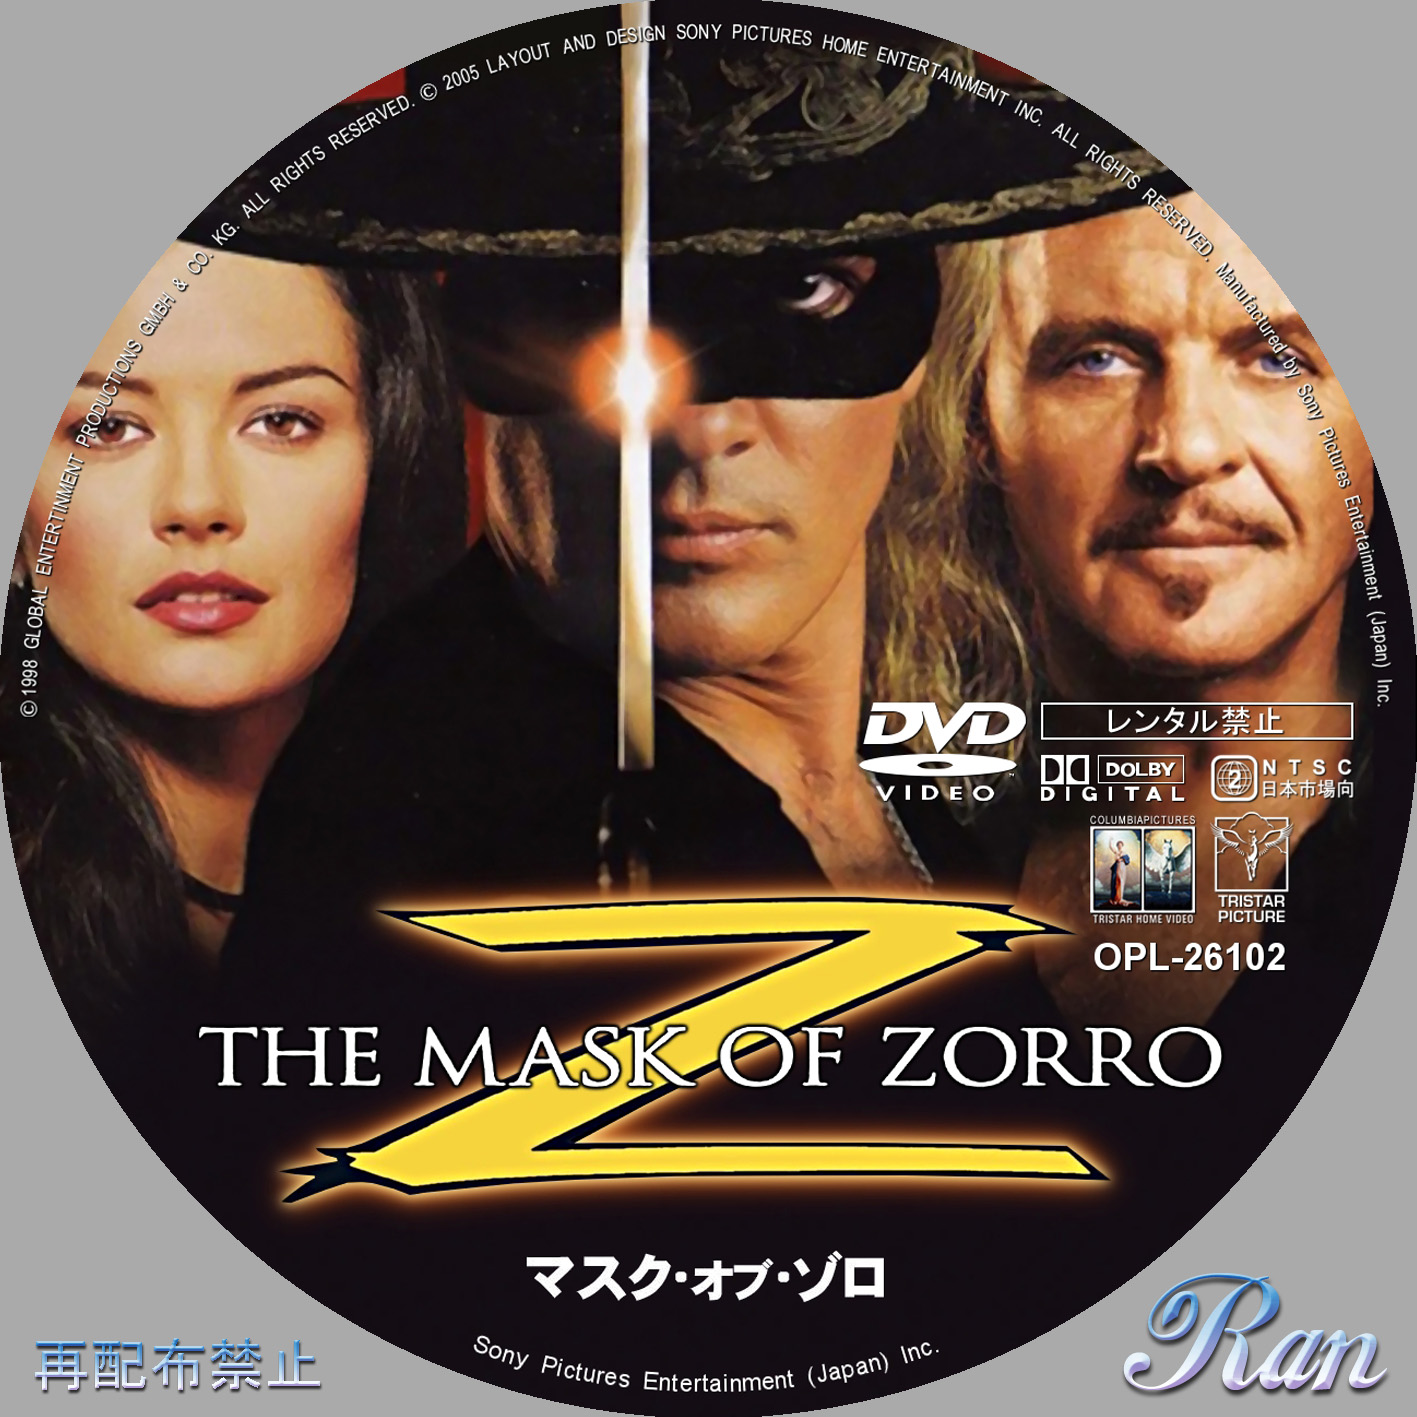 Be Fond of the Movies マスク・オブ・ゾロ（原題：The Mask of Zorro）